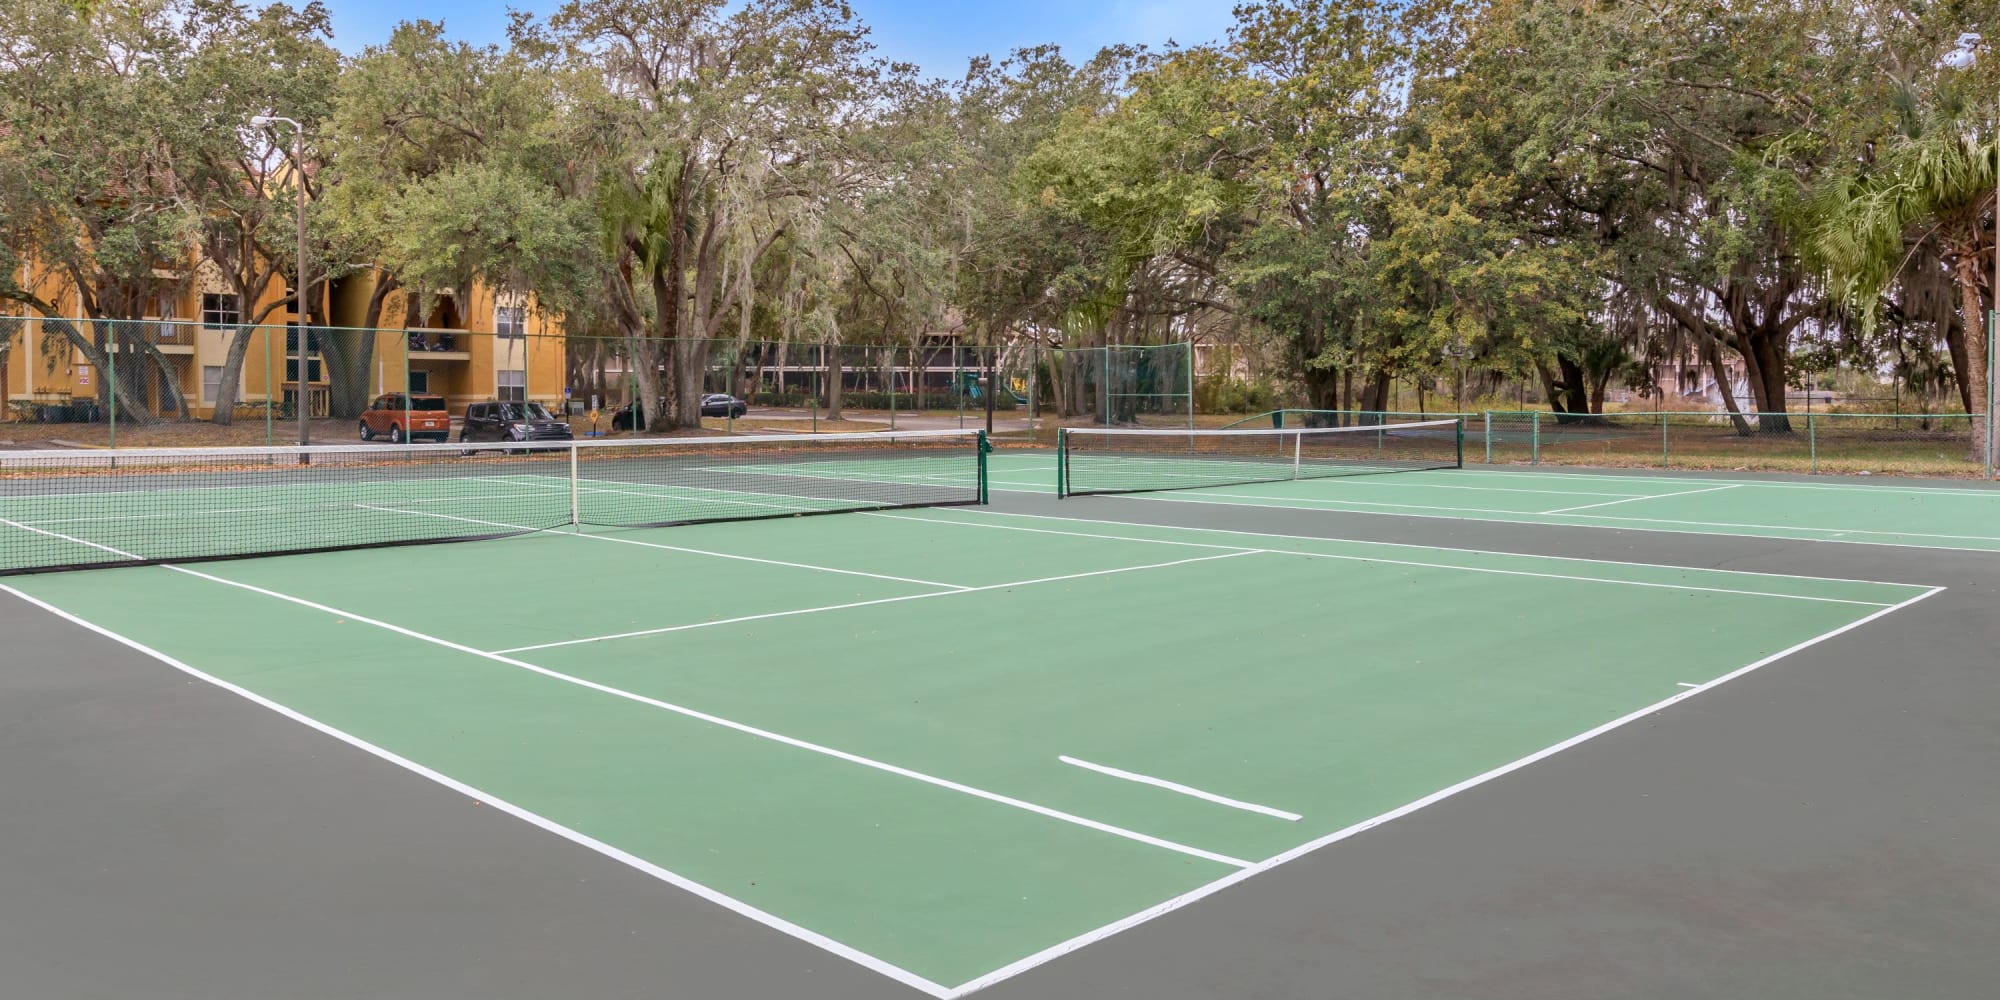 Tennis court at Images Condominiums in Kissimmee, Florida